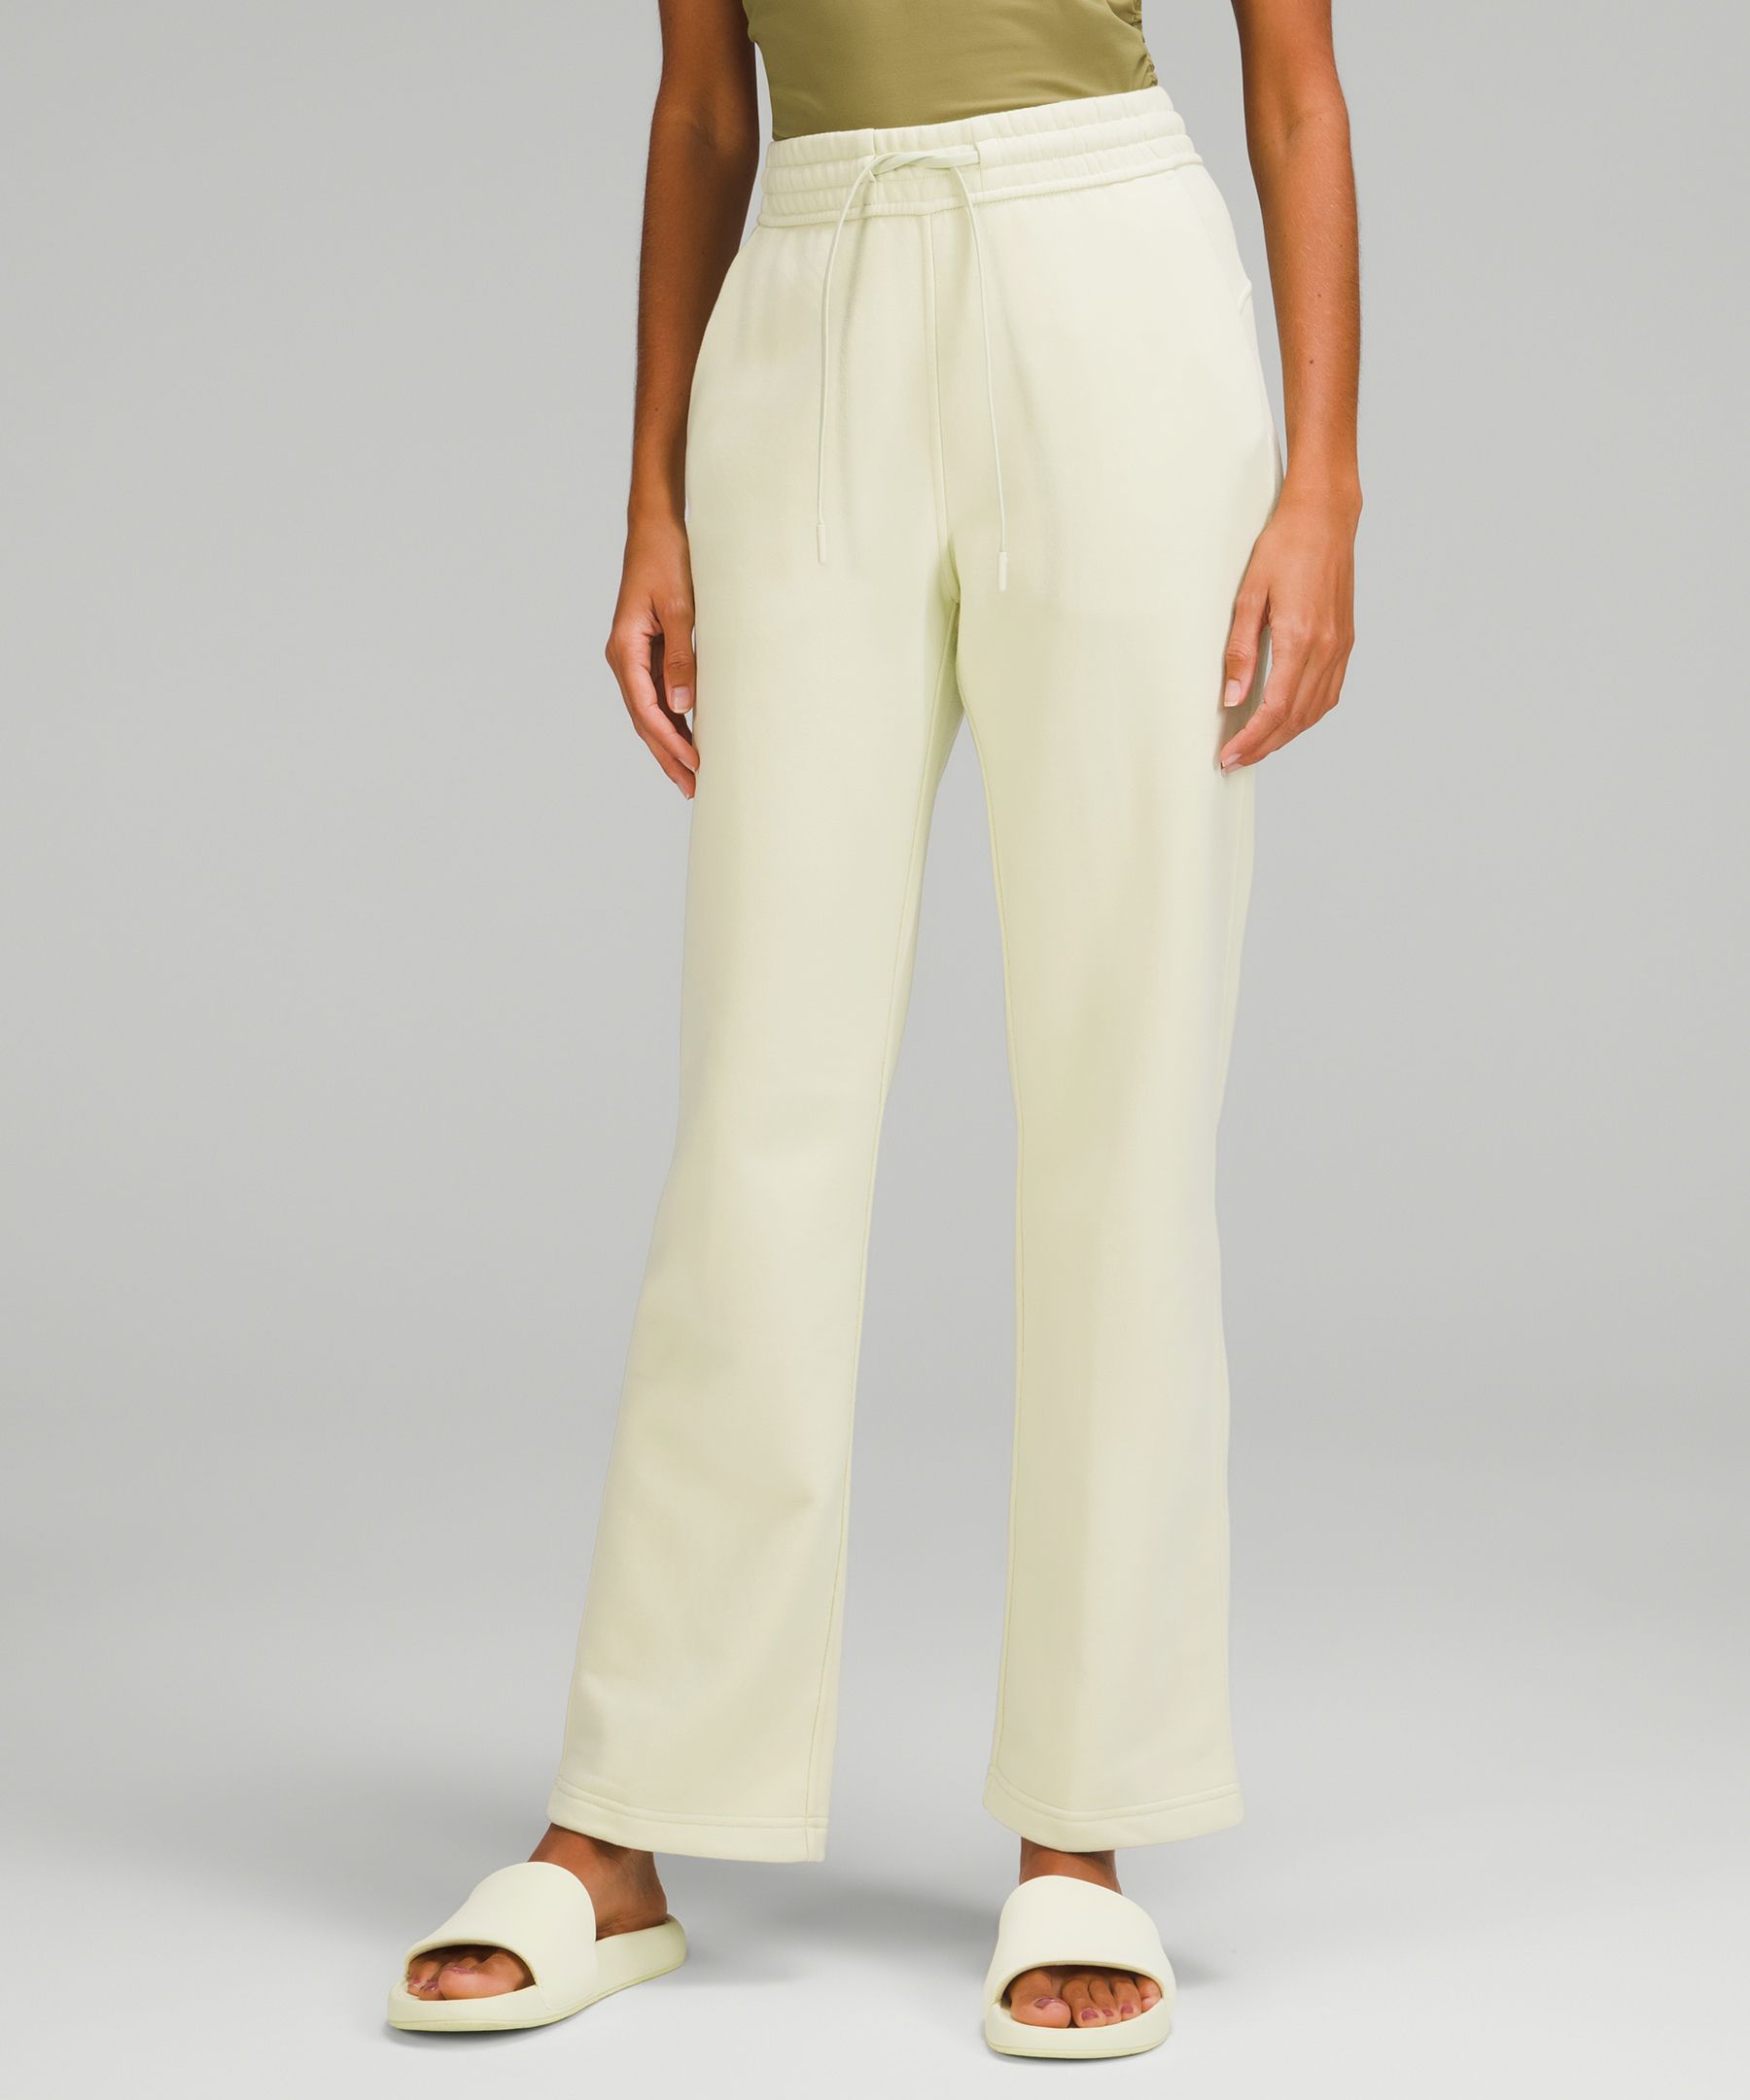 lululemon We Made Too Much restock: Softstreme flared pants under